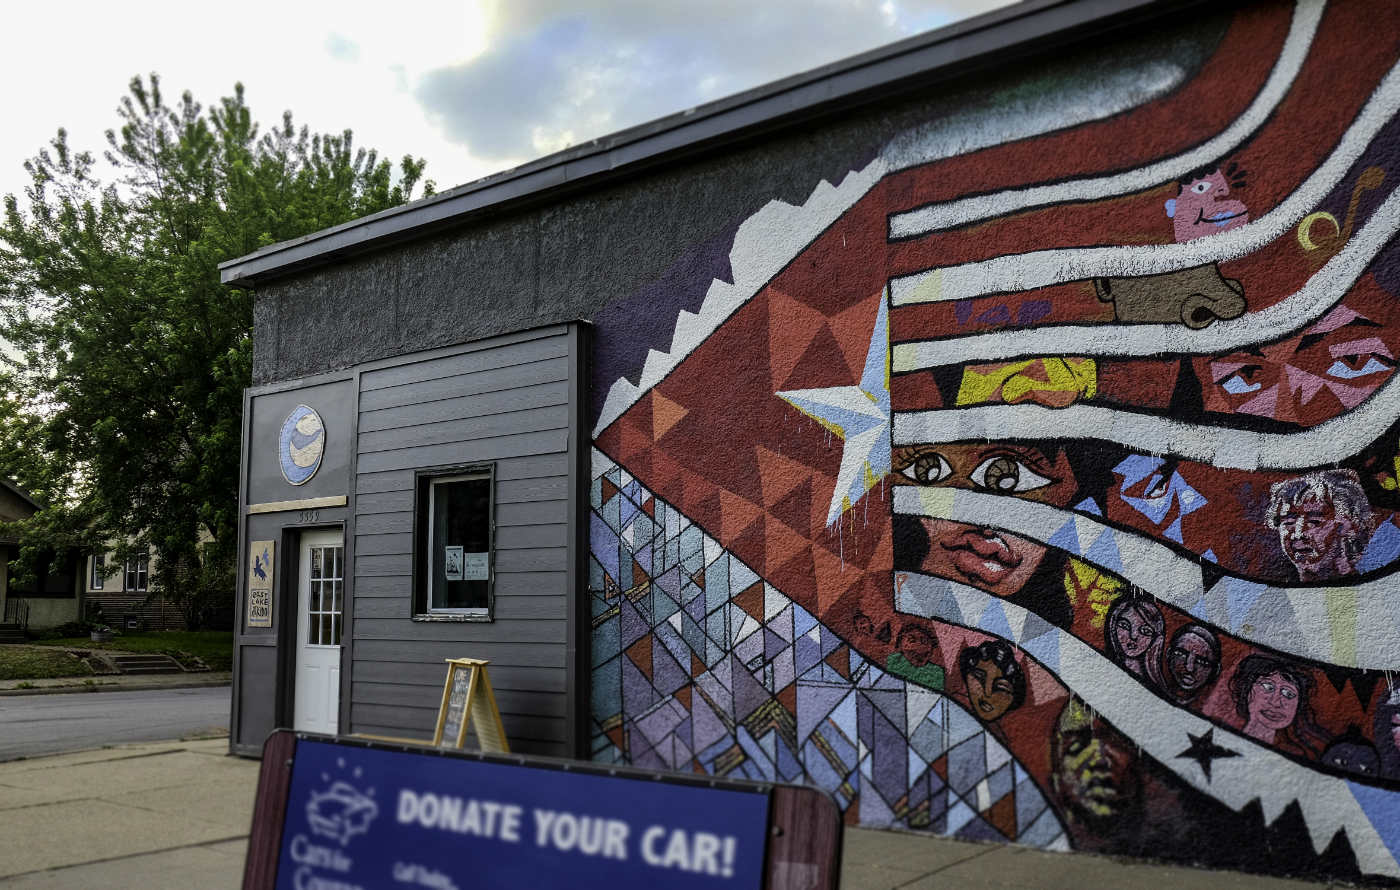 Gray building with mural depicting a diversity of faces in an abstracted flag design with red , white, and blue colors